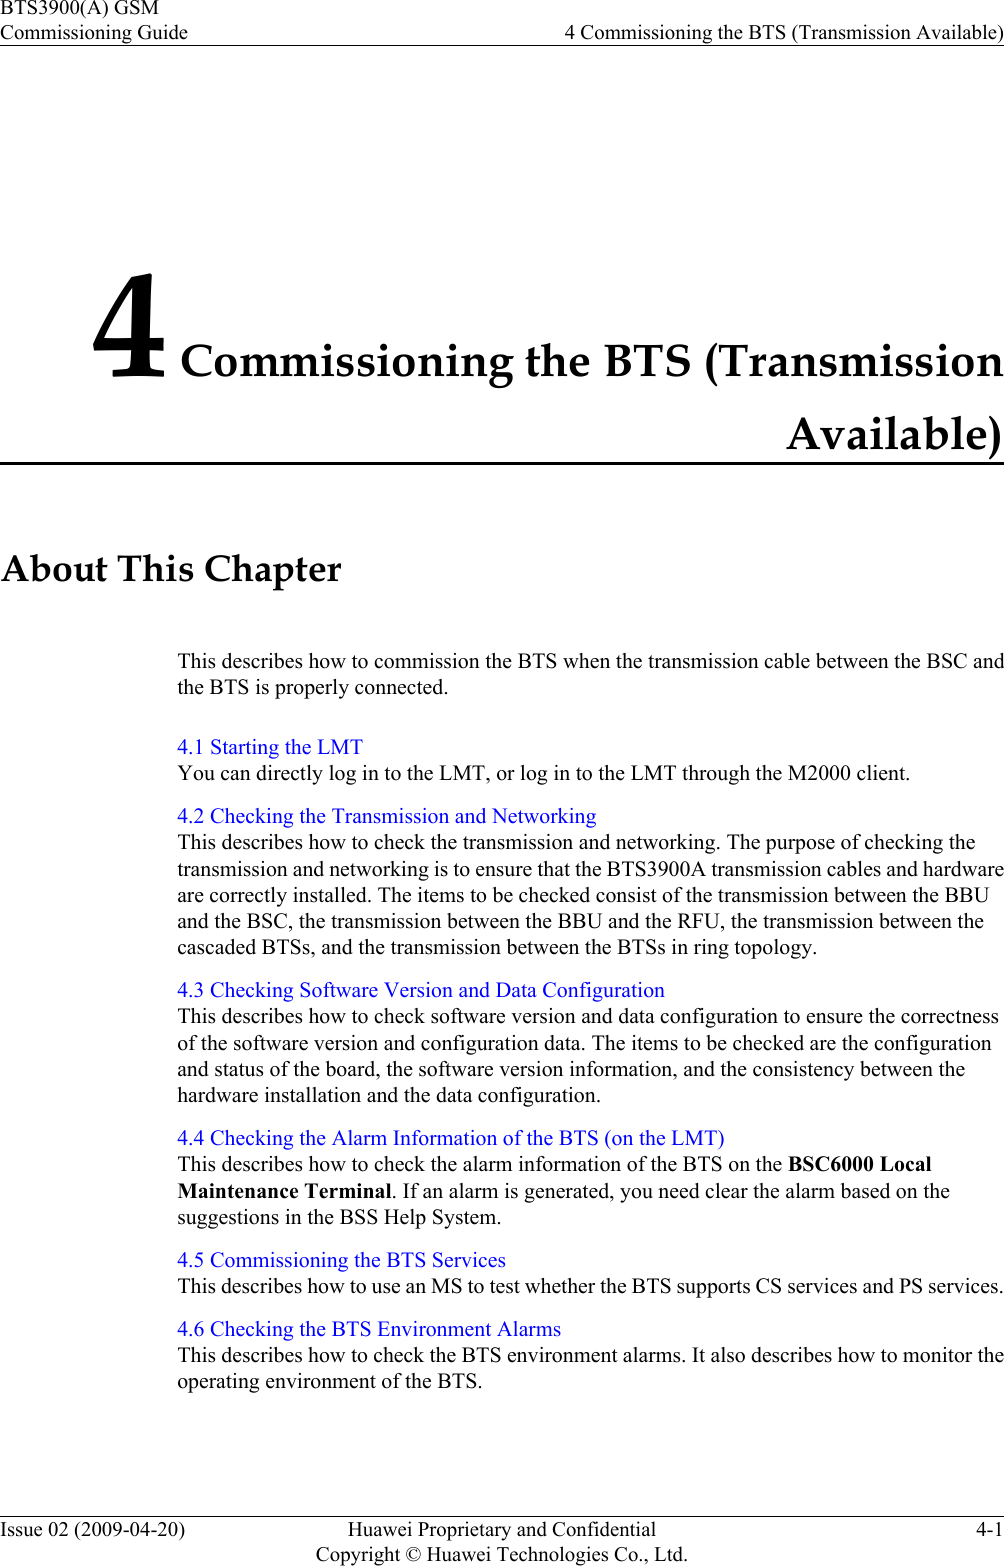 4 Commissioning the BTS (TransmissionAvailable)About This ChapterThis describes how to commission the BTS when the transmission cable between the BSC andthe BTS is properly connected.4.1 Starting the LMTYou can directly log in to the LMT, or log in to the LMT through the M2000 client.4.2 Checking the Transmission and NetworkingThis describes how to check the transmission and networking. The purpose of checking thetransmission and networking is to ensure that the BTS3900A transmission cables and hardwareare correctly installed. The items to be checked consist of the transmission between the BBUand the BSC, the transmission between the BBU and the RFU, the transmission between thecascaded BTSs, and the transmission between the BTSs in ring topology.4.3 Checking Software Version and Data ConfigurationThis describes how to check software version and data configuration to ensure the correctnessof the software version and configuration data. The items to be checked are the configurationand status of the board, the software version information, and the consistency between thehardware installation and the data configuration.4.4 Checking the Alarm Information of the BTS (on the LMT)This describes how to check the alarm information of the BTS on the BSC6000 LocalMaintenance Terminal. If an alarm is generated, you need clear the alarm based on thesuggestions in the BSS Help System.4.5 Commissioning the BTS ServicesThis describes how to use an MS to test whether the BTS supports CS services and PS services.4.6 Checking the BTS Environment AlarmsThis describes how to check the BTS environment alarms. It also describes how to monitor theoperating environment of the BTS.BTS3900(A) GSMCommissioning Guide 4 Commissioning the BTS (Transmission Available)Issue 02 (2009-04-20) Huawei Proprietary and ConfidentialCopyright © Huawei Technologies Co., Ltd.4-1